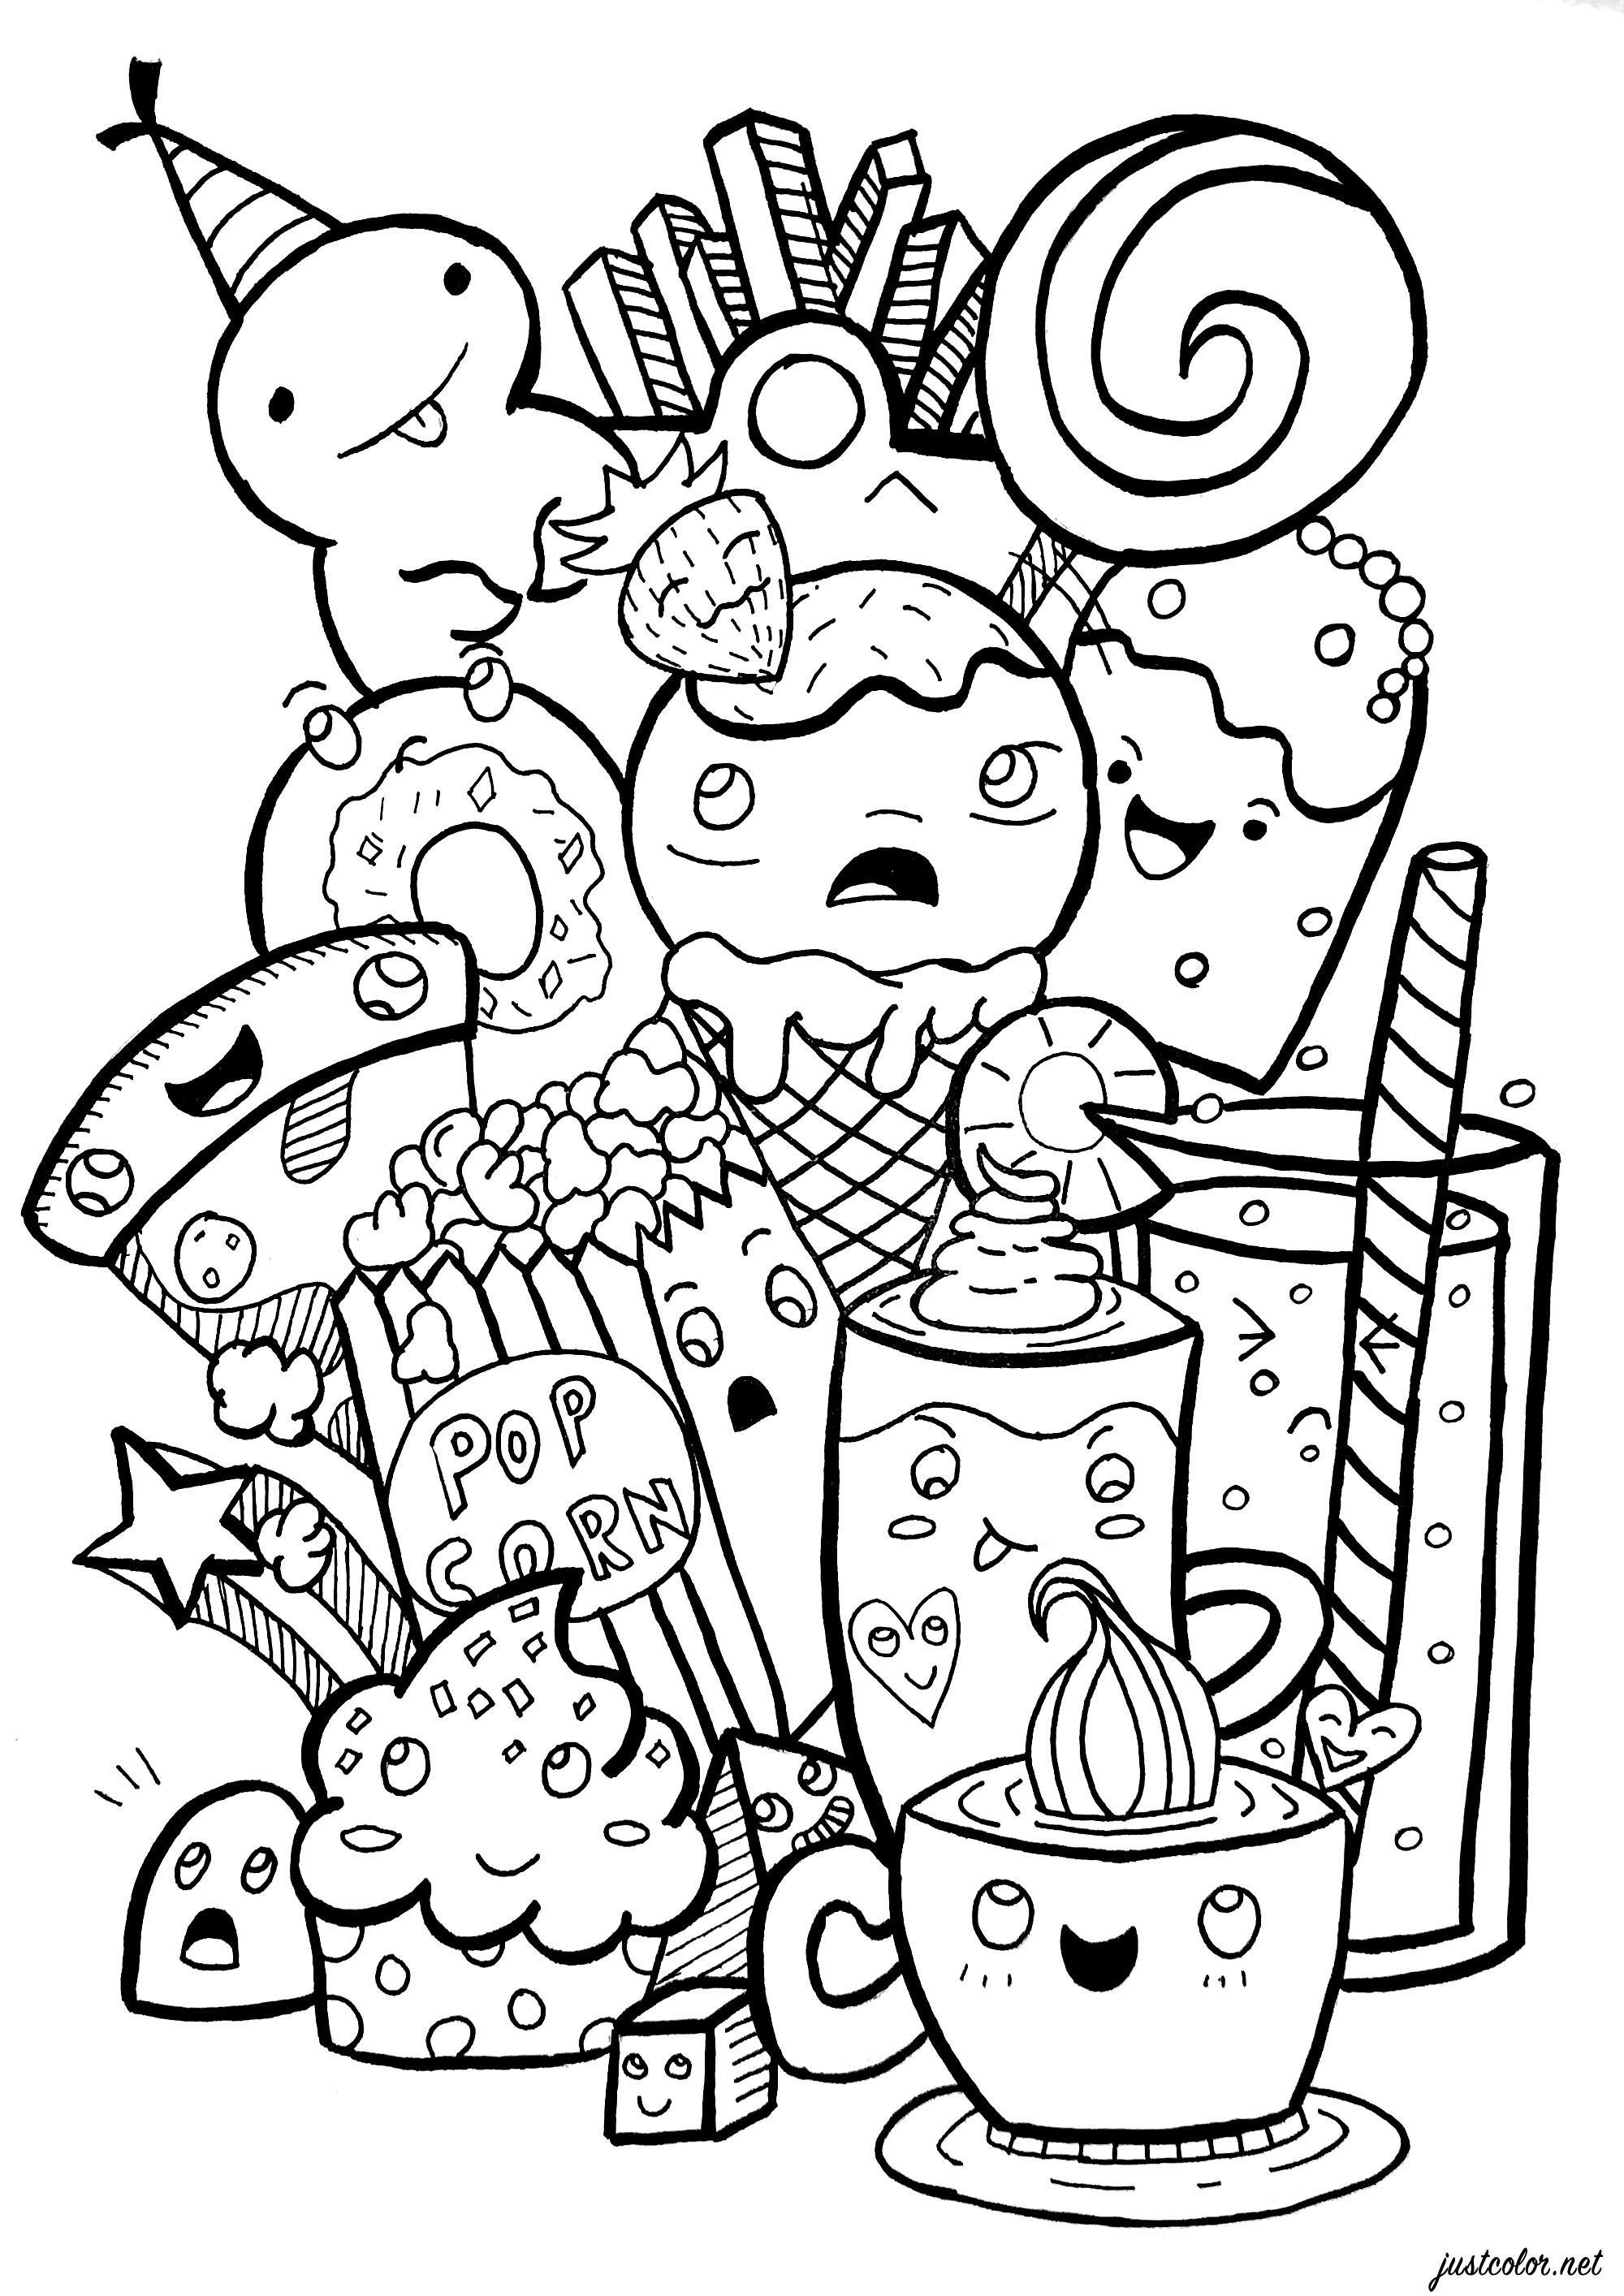 Color all these strange sweet and delicious creatures : pizzas, fries, cupcakes, sodas .., Artist : Gamma